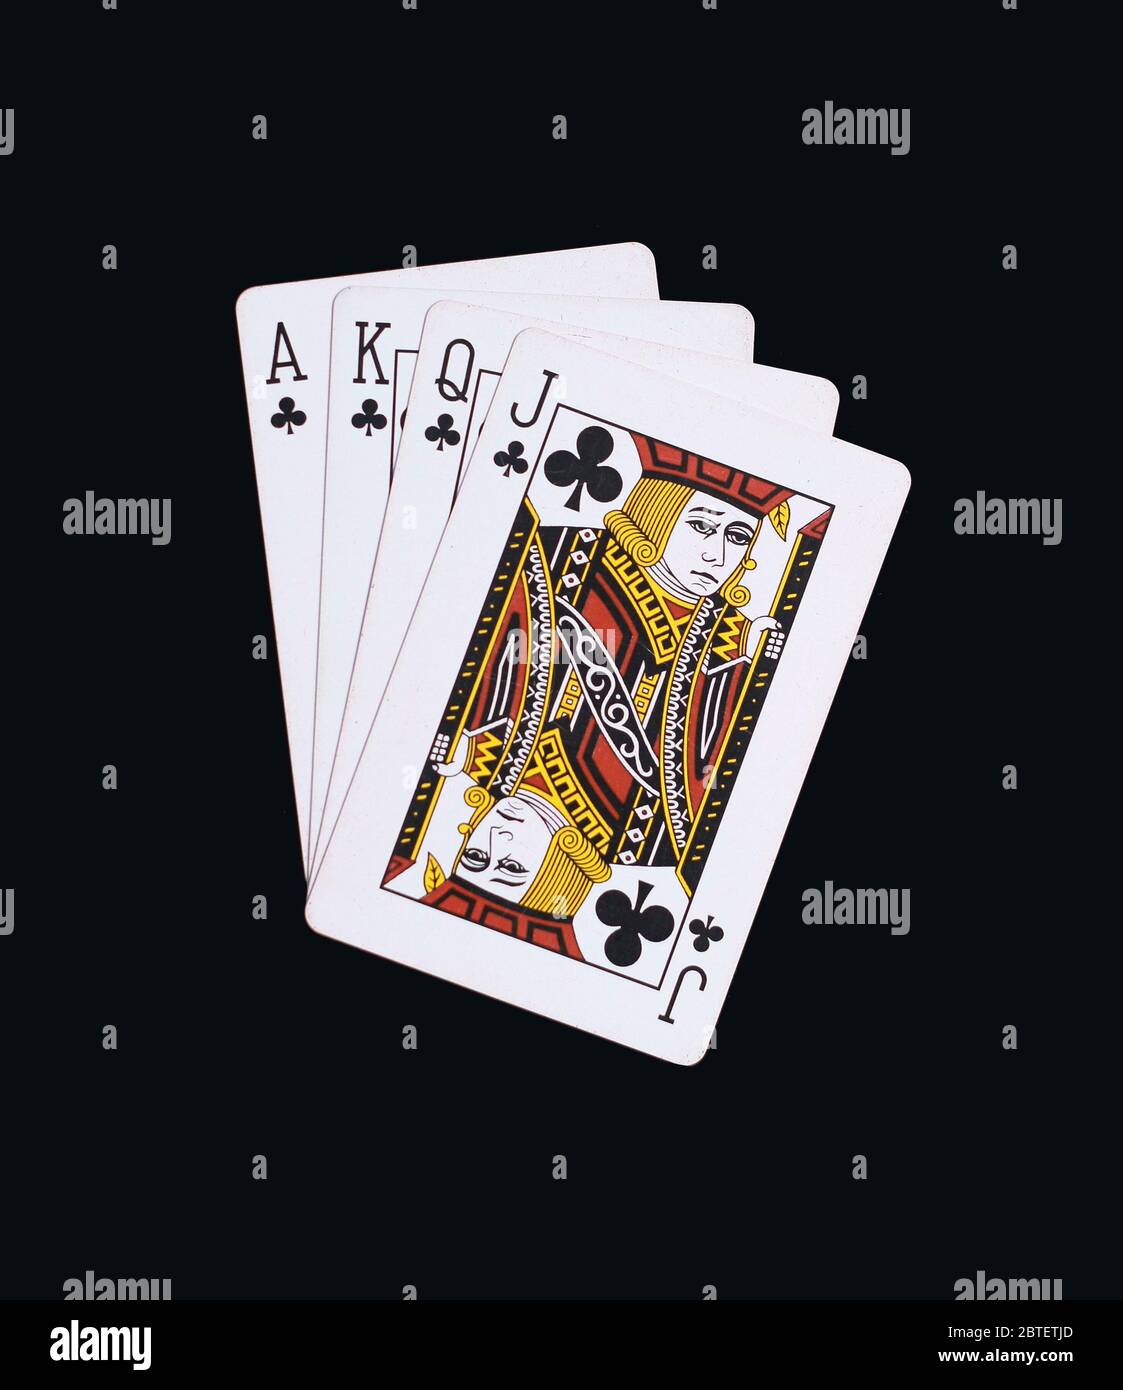 Poker clubs of J Q K A playing cards isolated on black background Stock Photo